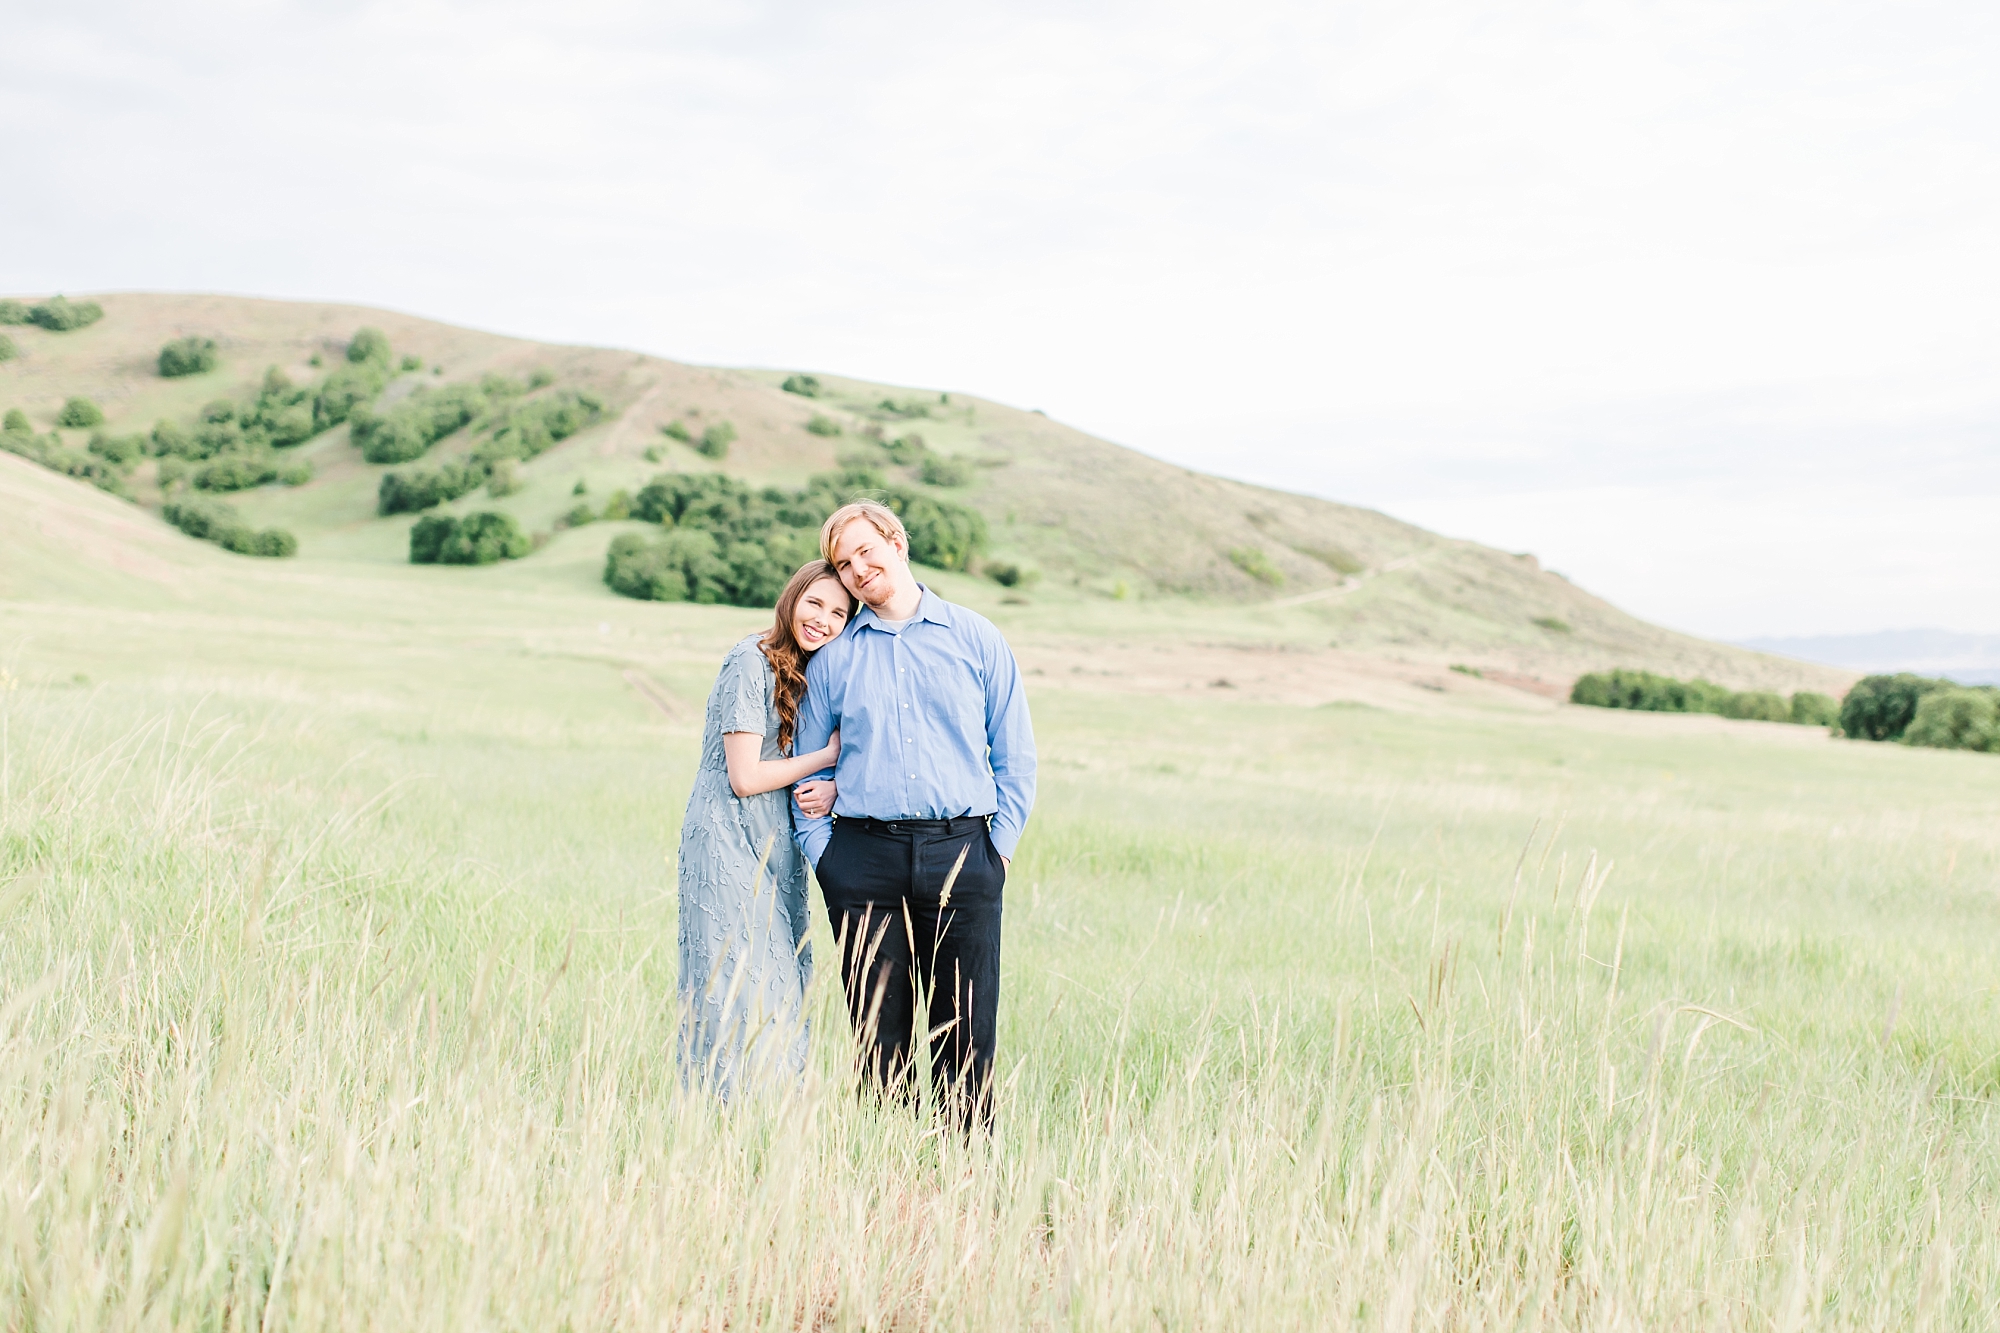 Tunnel Springs Utah is a stunning location for spring engagements